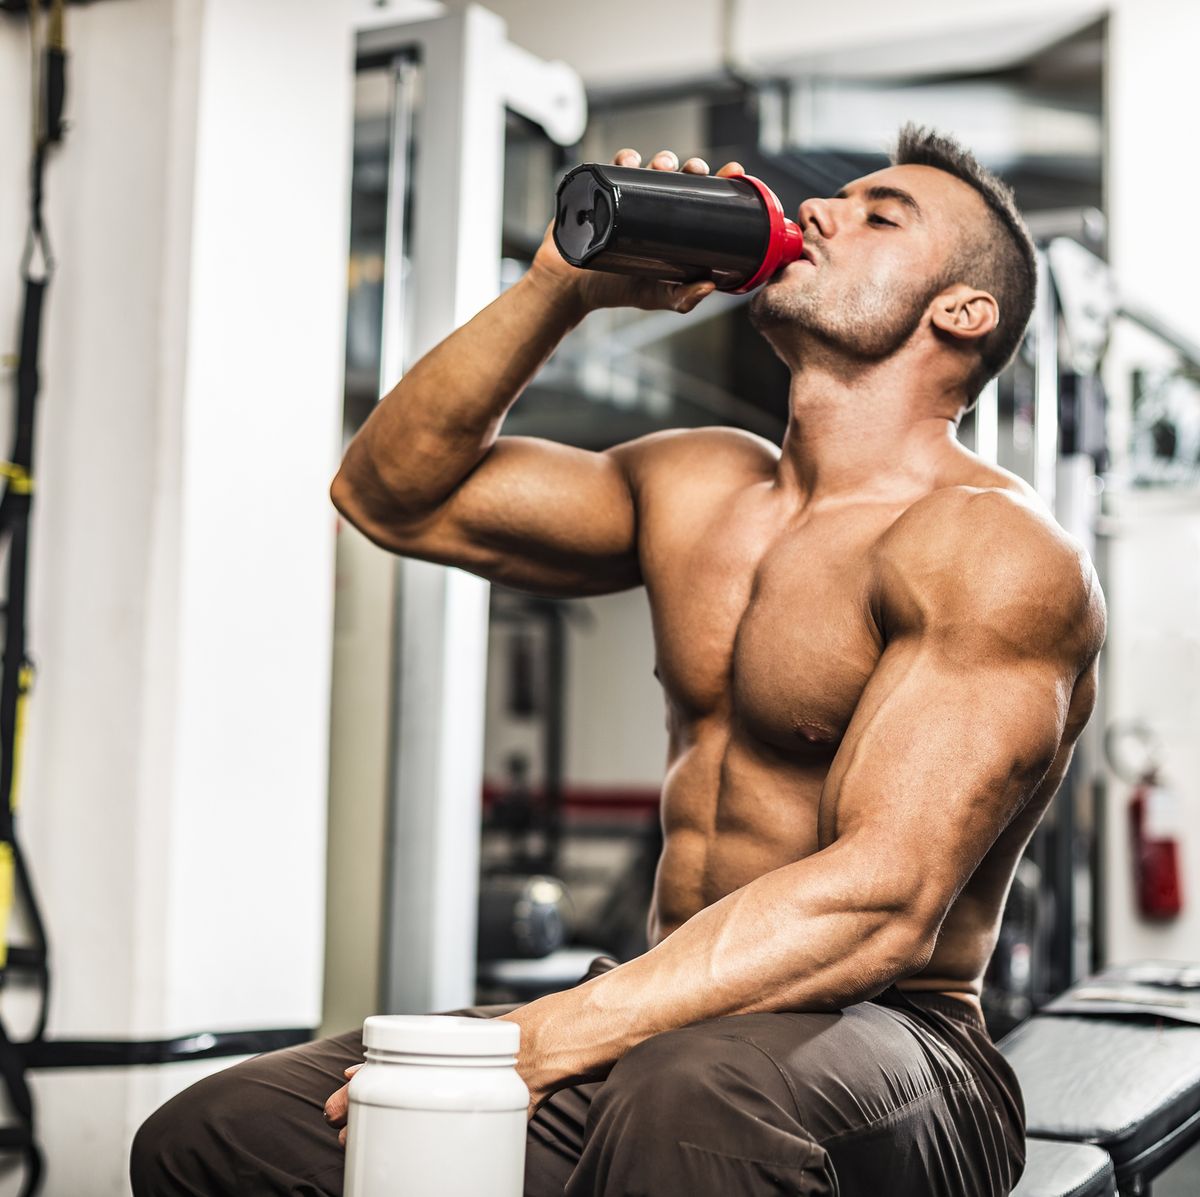 https://hips.hearstapps.com/hmg-prod/images/young-man-drinking-his-proteins-at-the-gym-royalty-free-image-1607949801.?crop=0.668xw:1.00xh;0.167xw,0&resize=1200:*